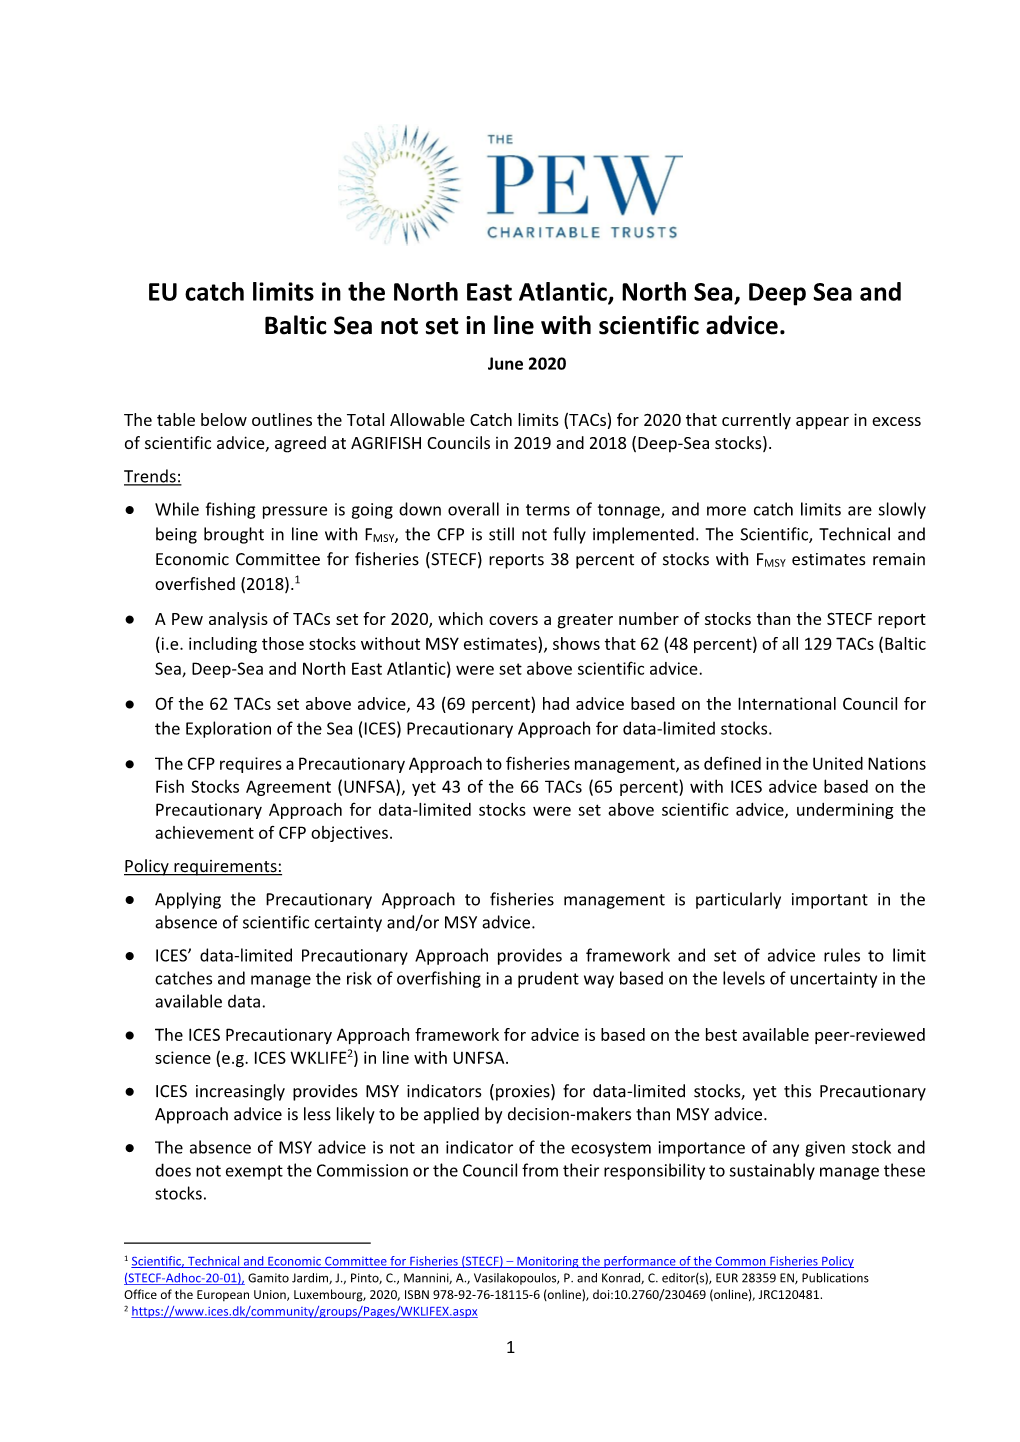 EU Catch Limits in the North East Atlantic, North Sea, Deep Sea and Baltic Sea Not Set in Line with Scientific Advice